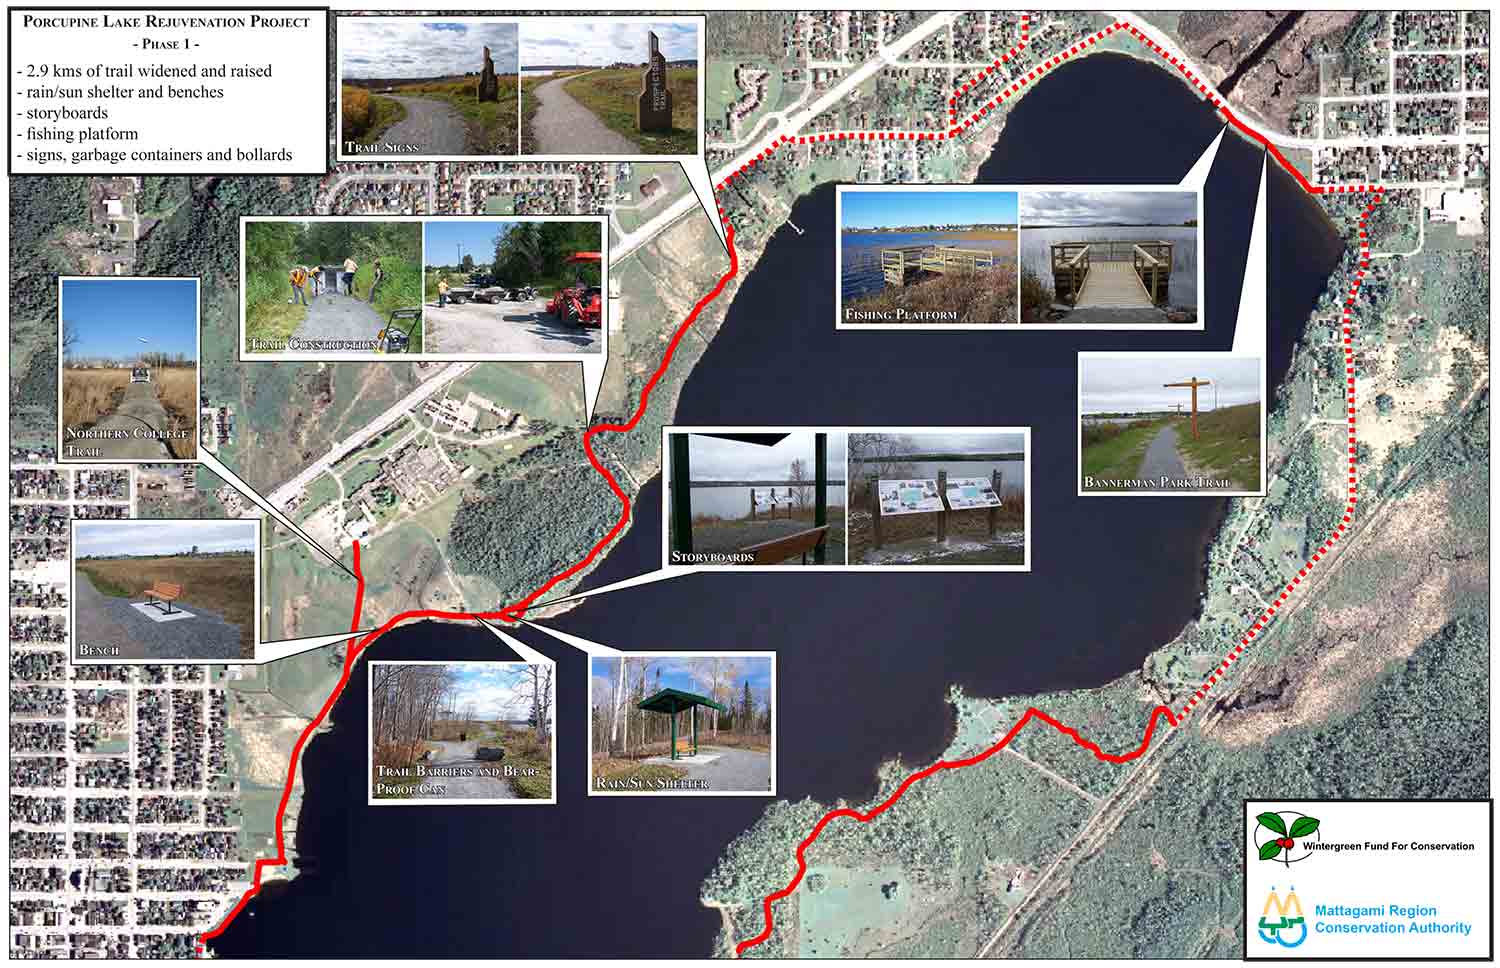 Map of the Porcupine Lake Trail showing the projects completed as part of the Porcupine Lake Rejuvenation